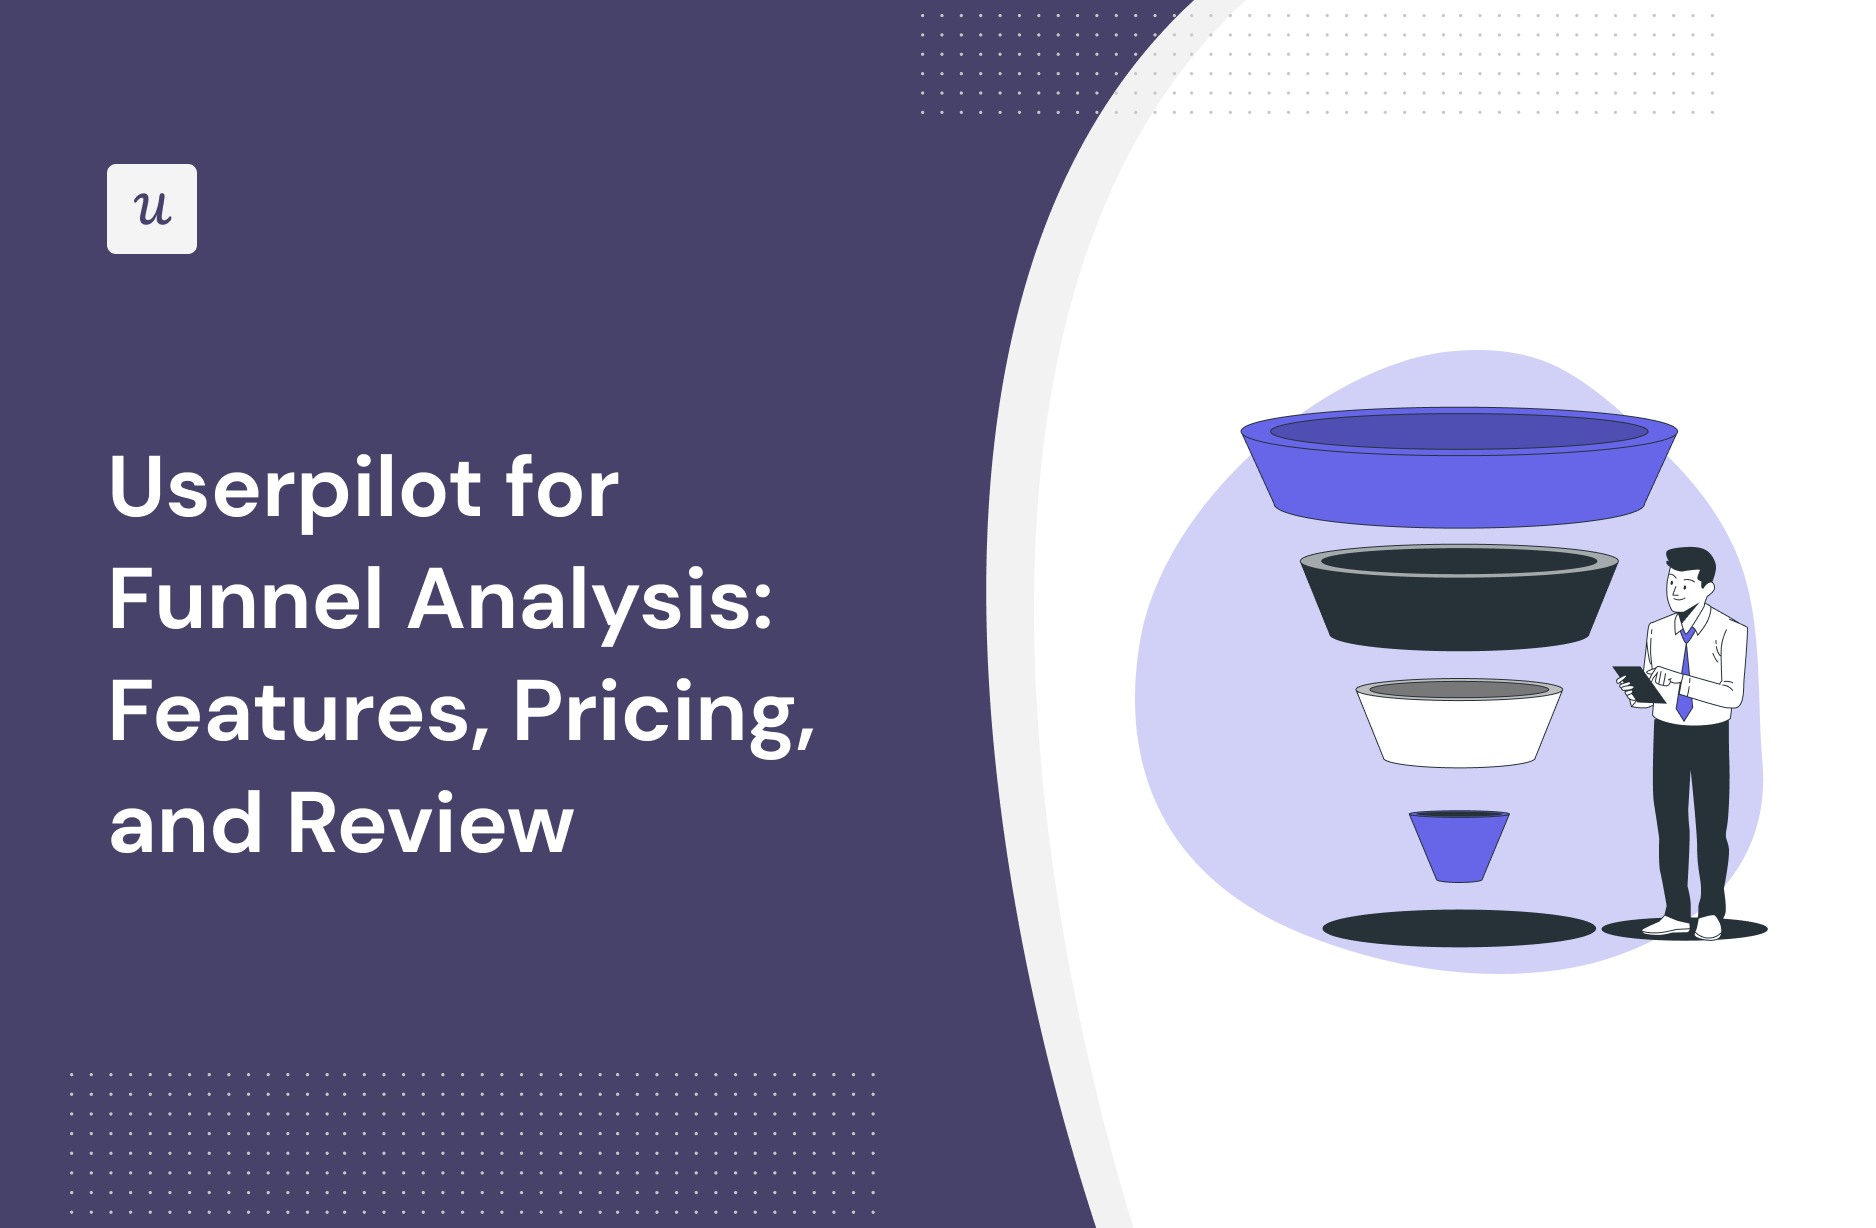 Userpilot for Funnel Analysis: Features, Pricing, and Review